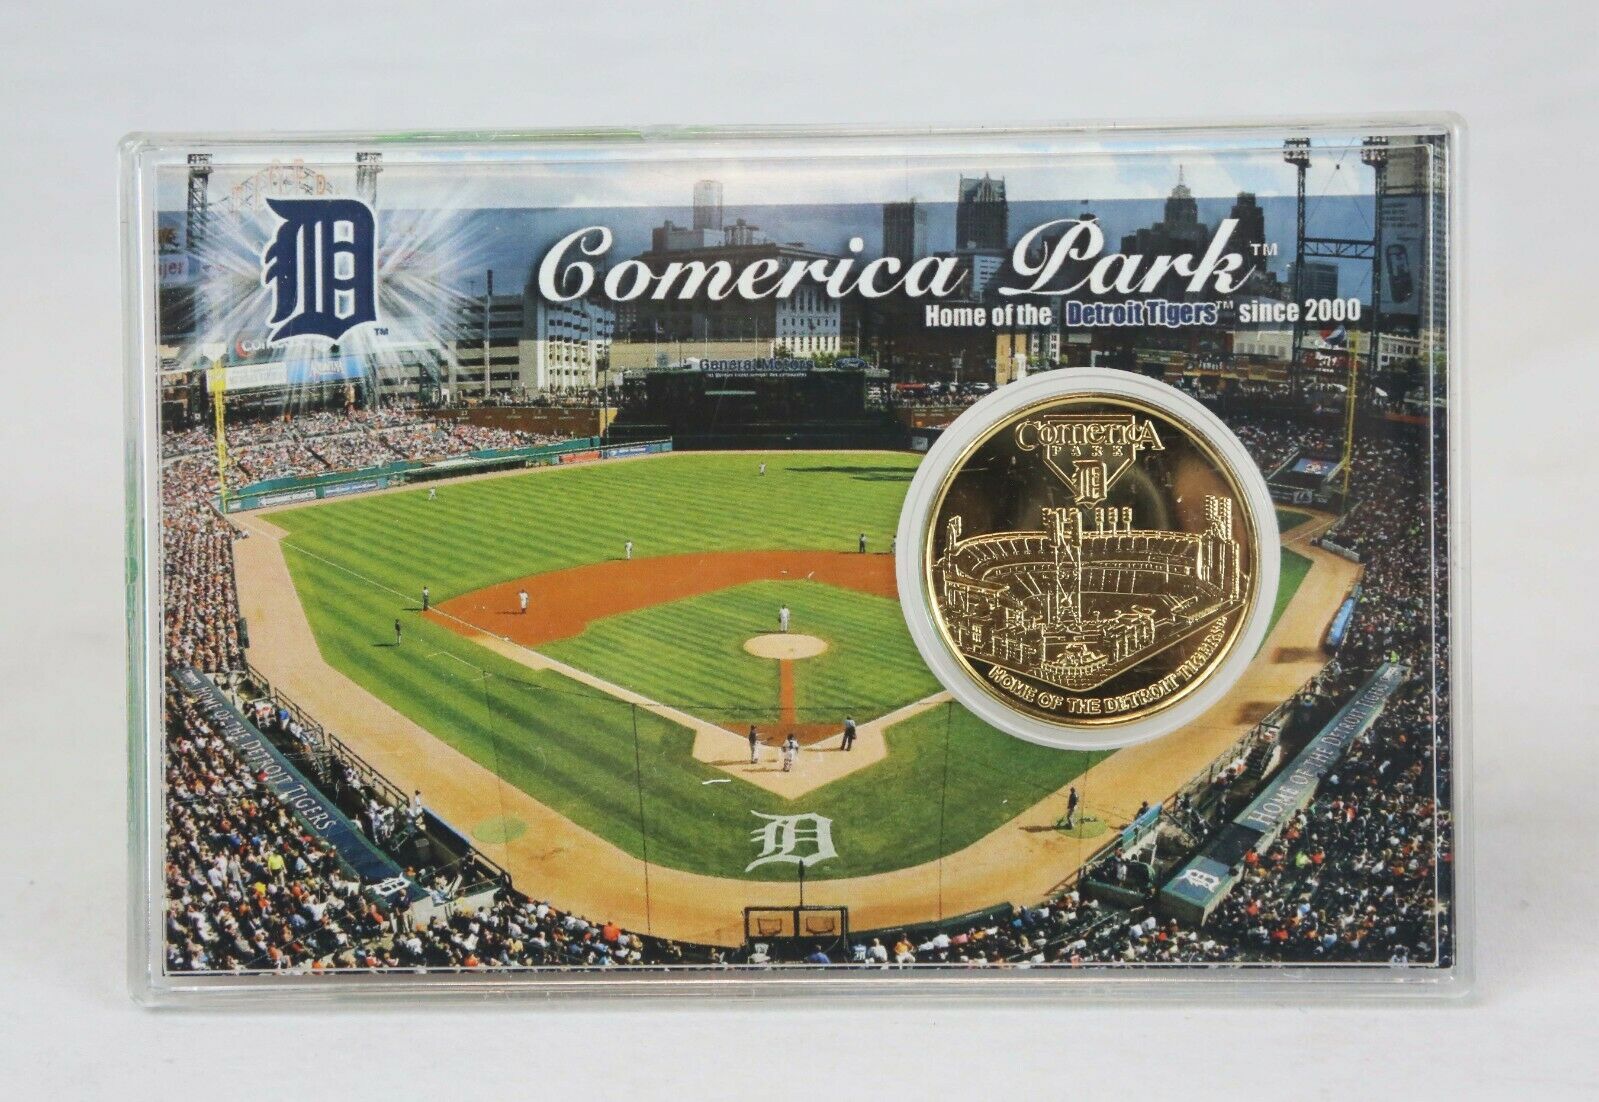 Detroit Tigers Comerica Park Highland Mint MLB 24K Gold Overlay Coin - $24.74